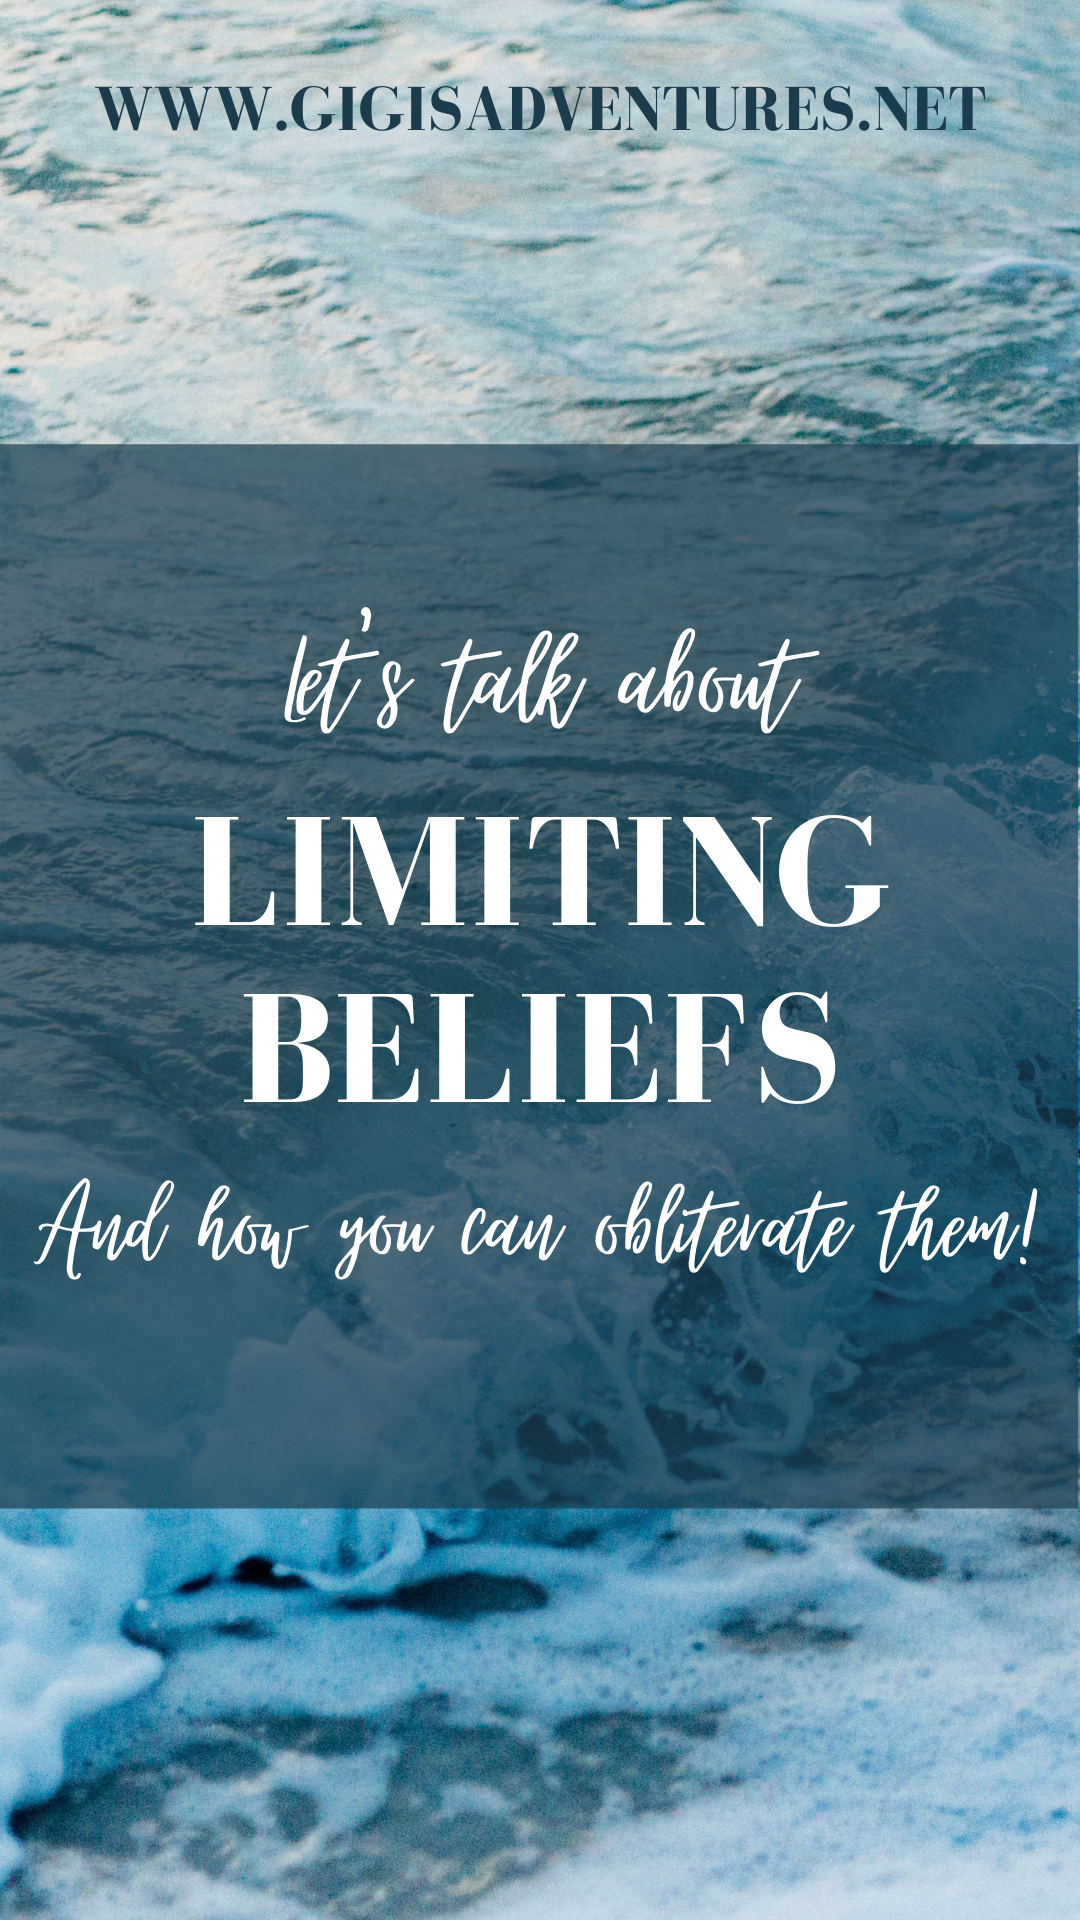 Let's Have A Talk About Limiting Beliefs And How You Can Obliterate Them